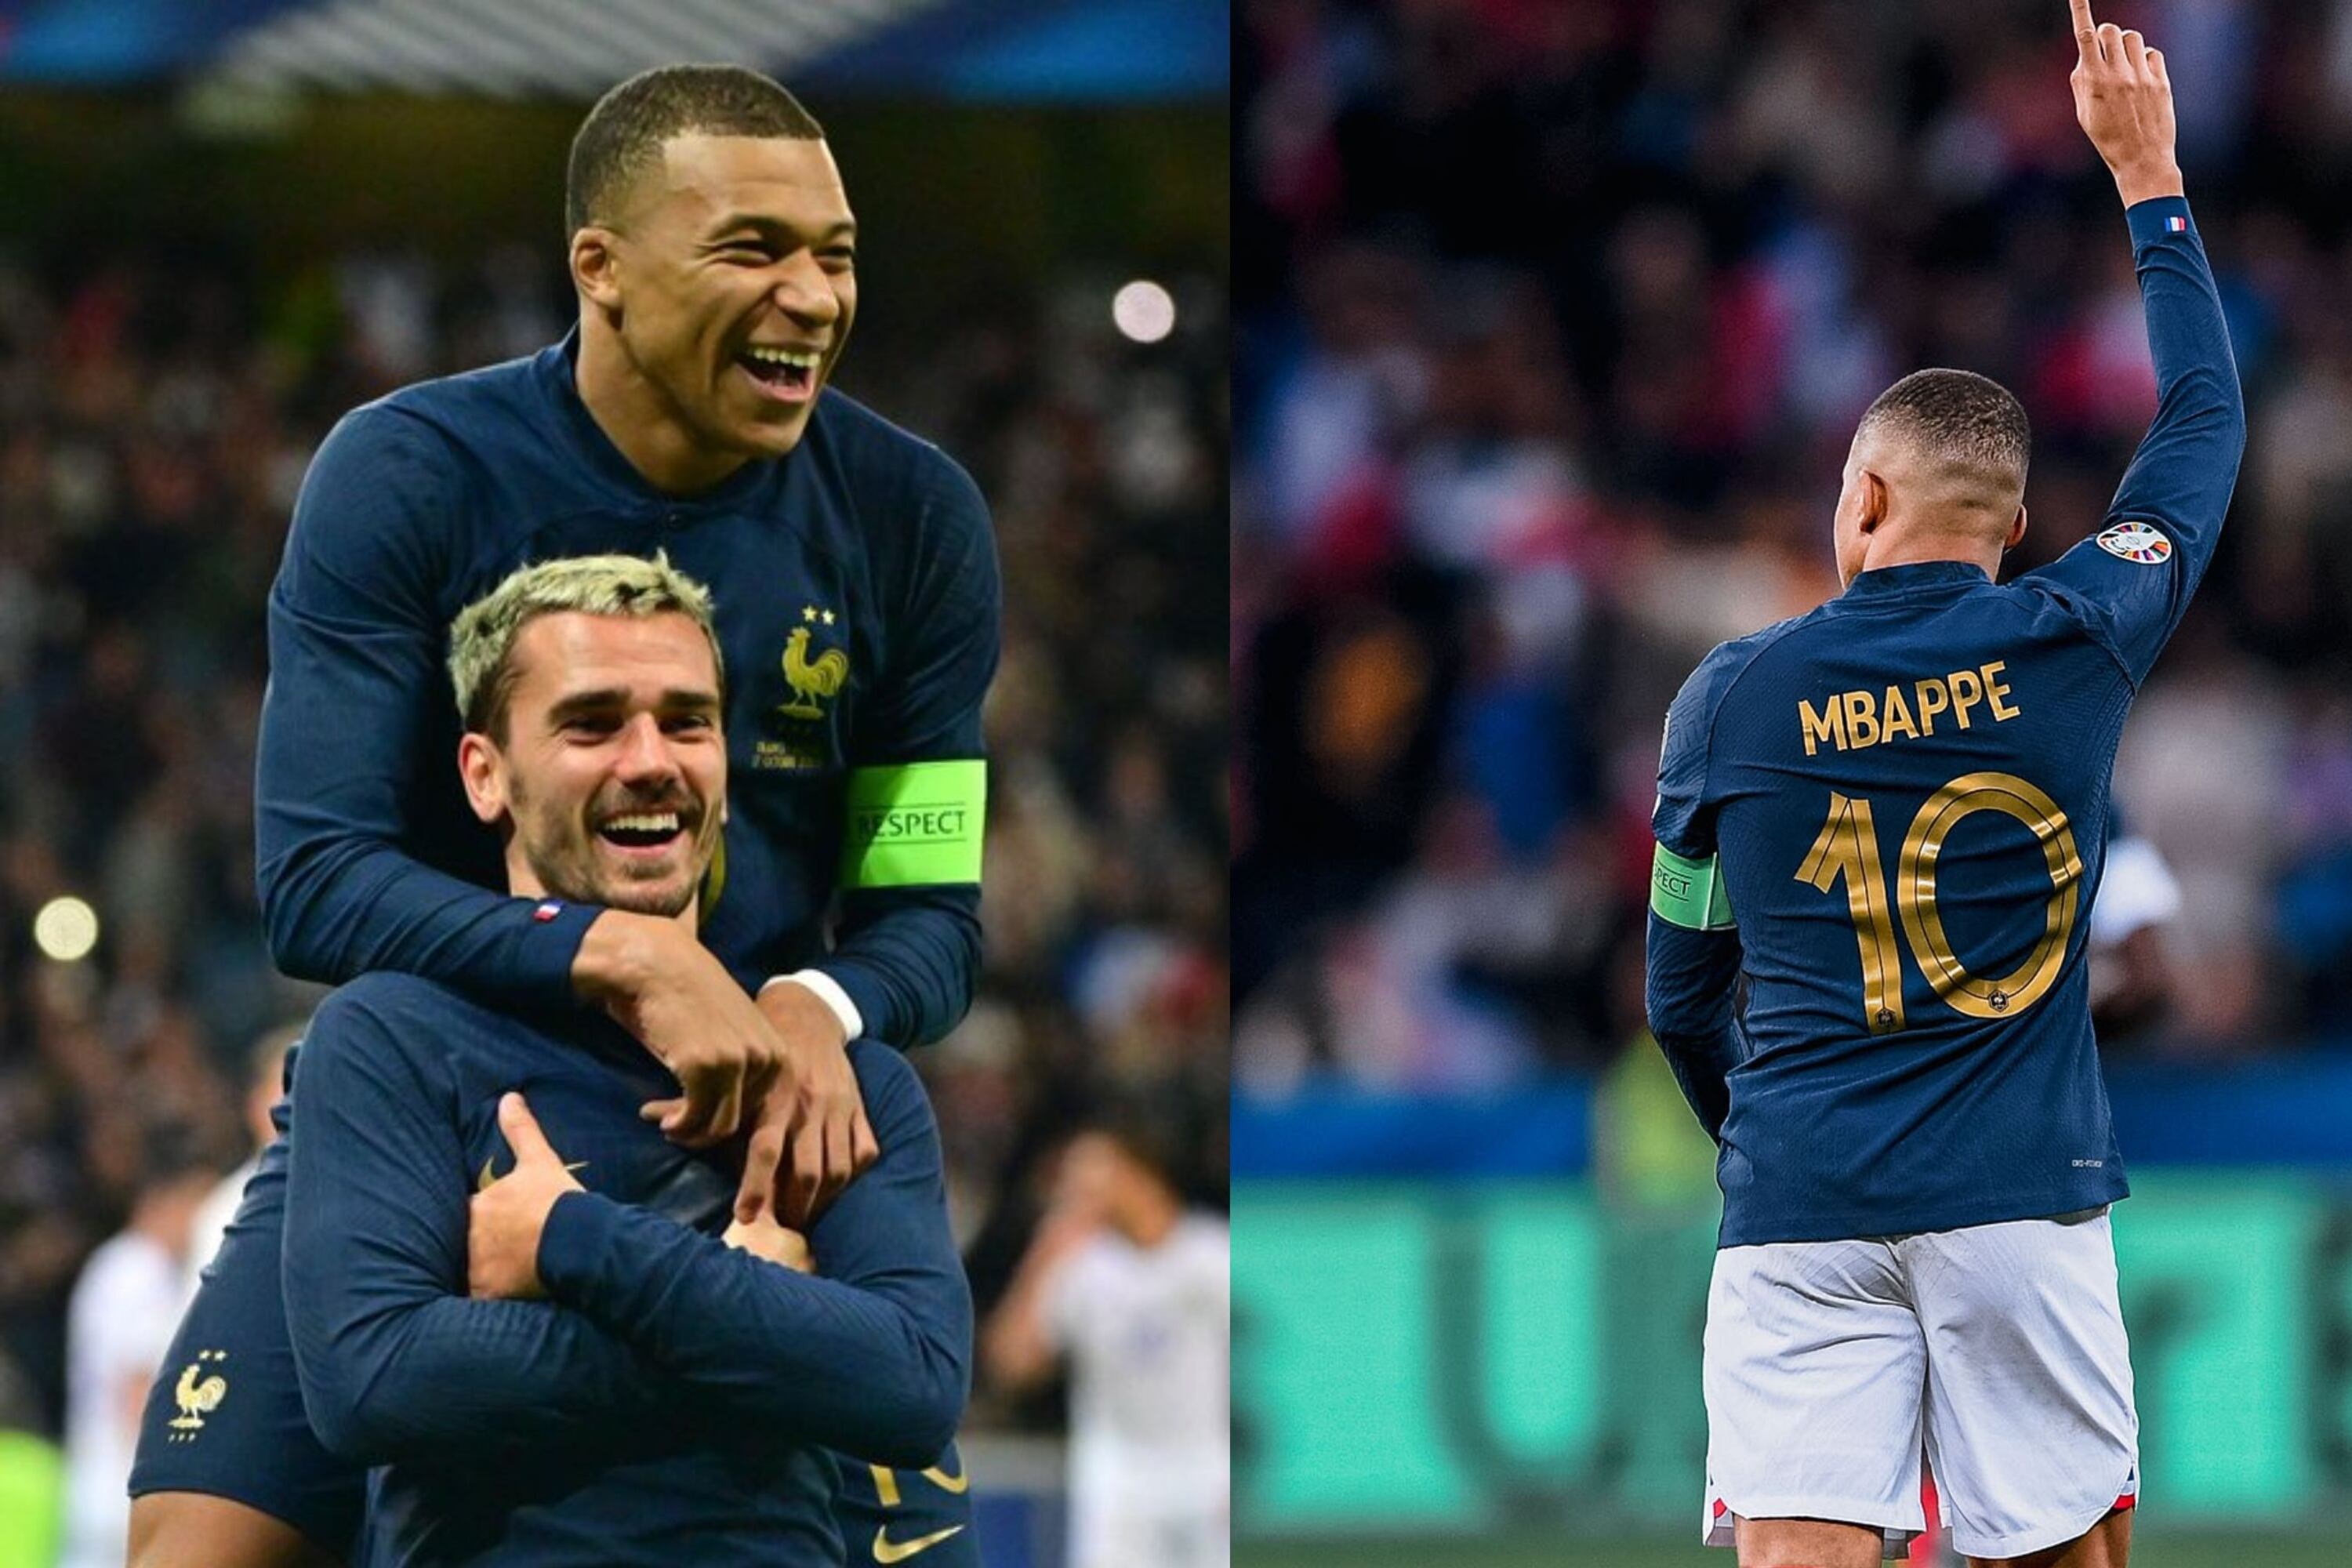 After winning 7-0 against Gibraltar, the new nickname given to Mbappe in France